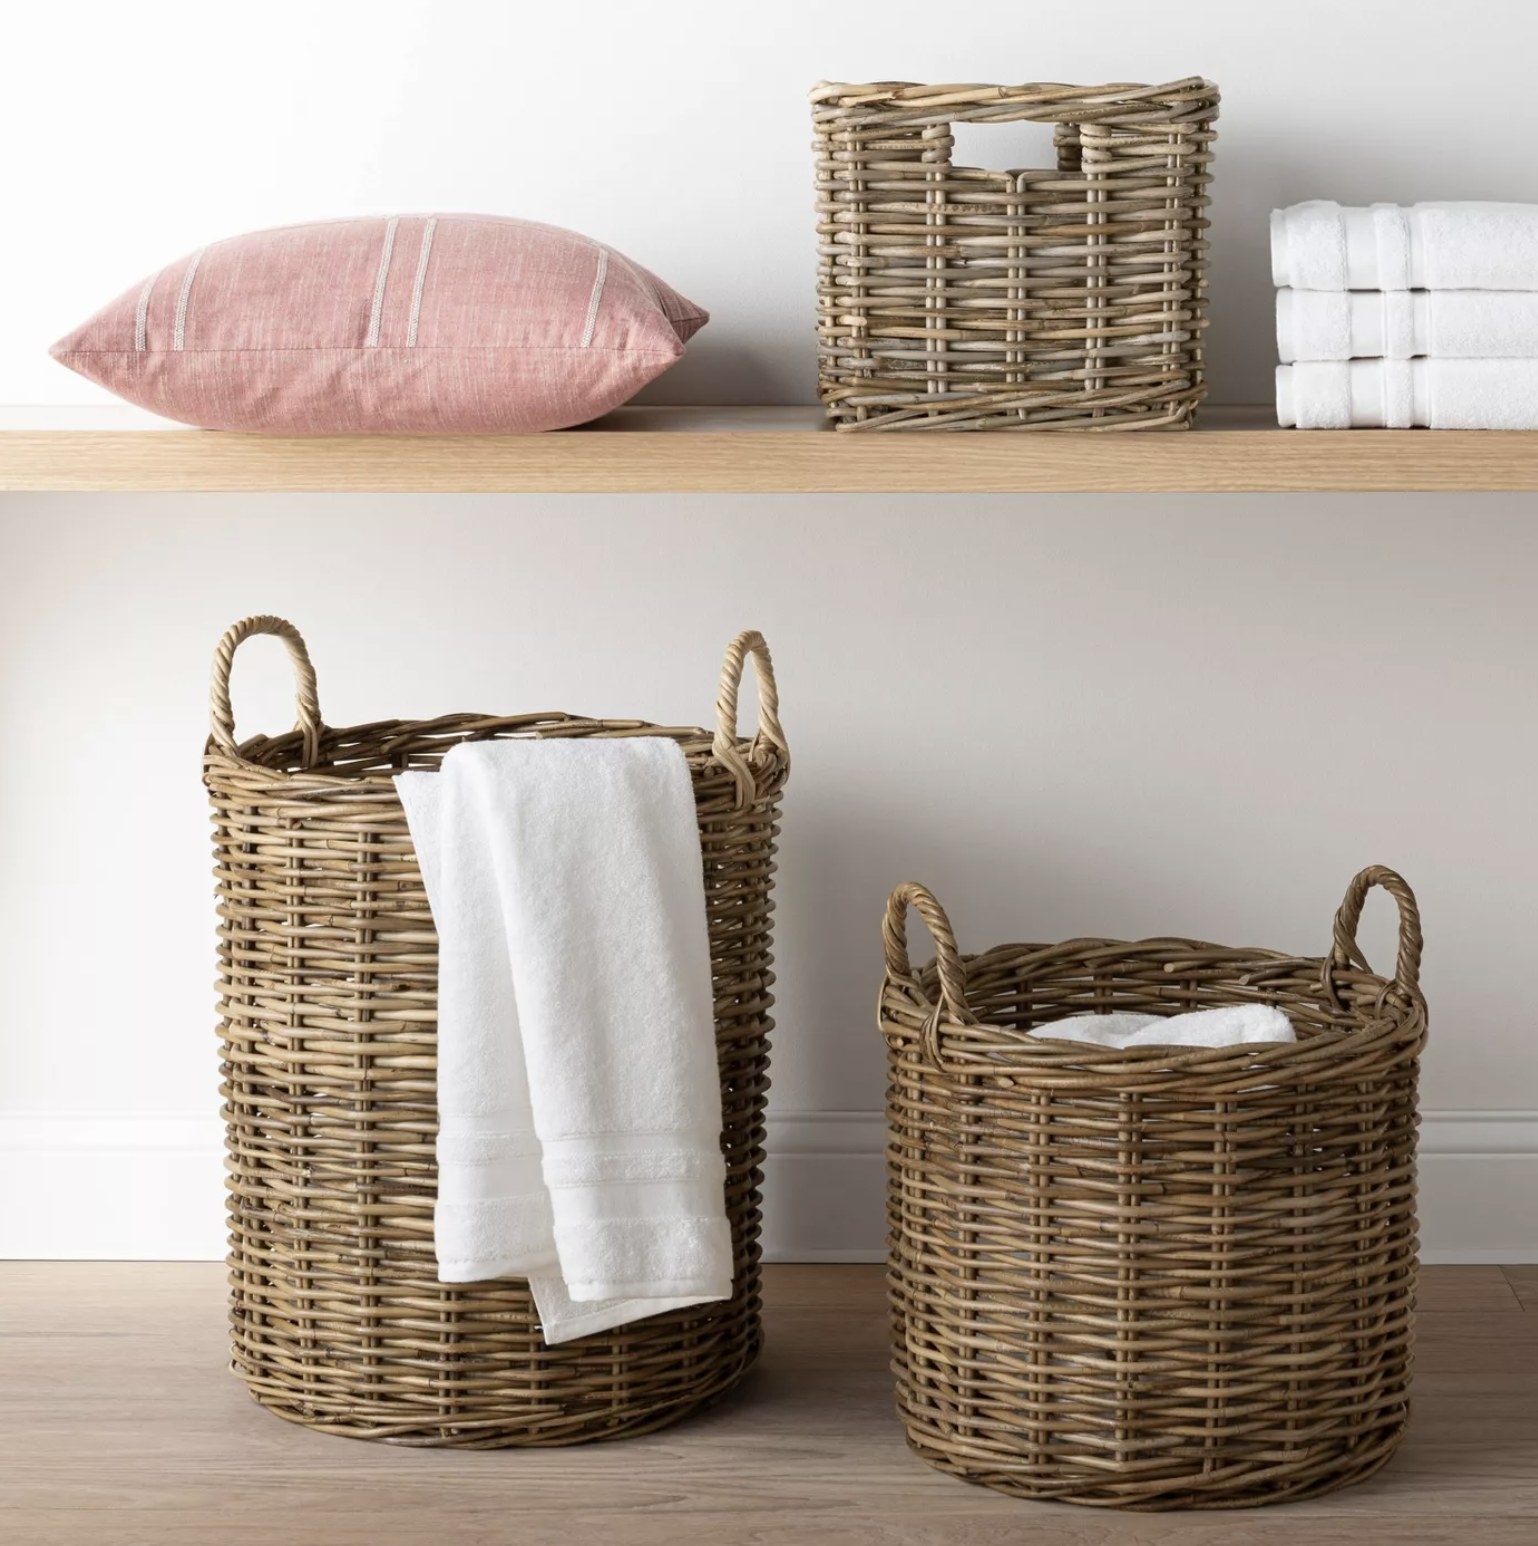 Round rattan baskets in various sizes